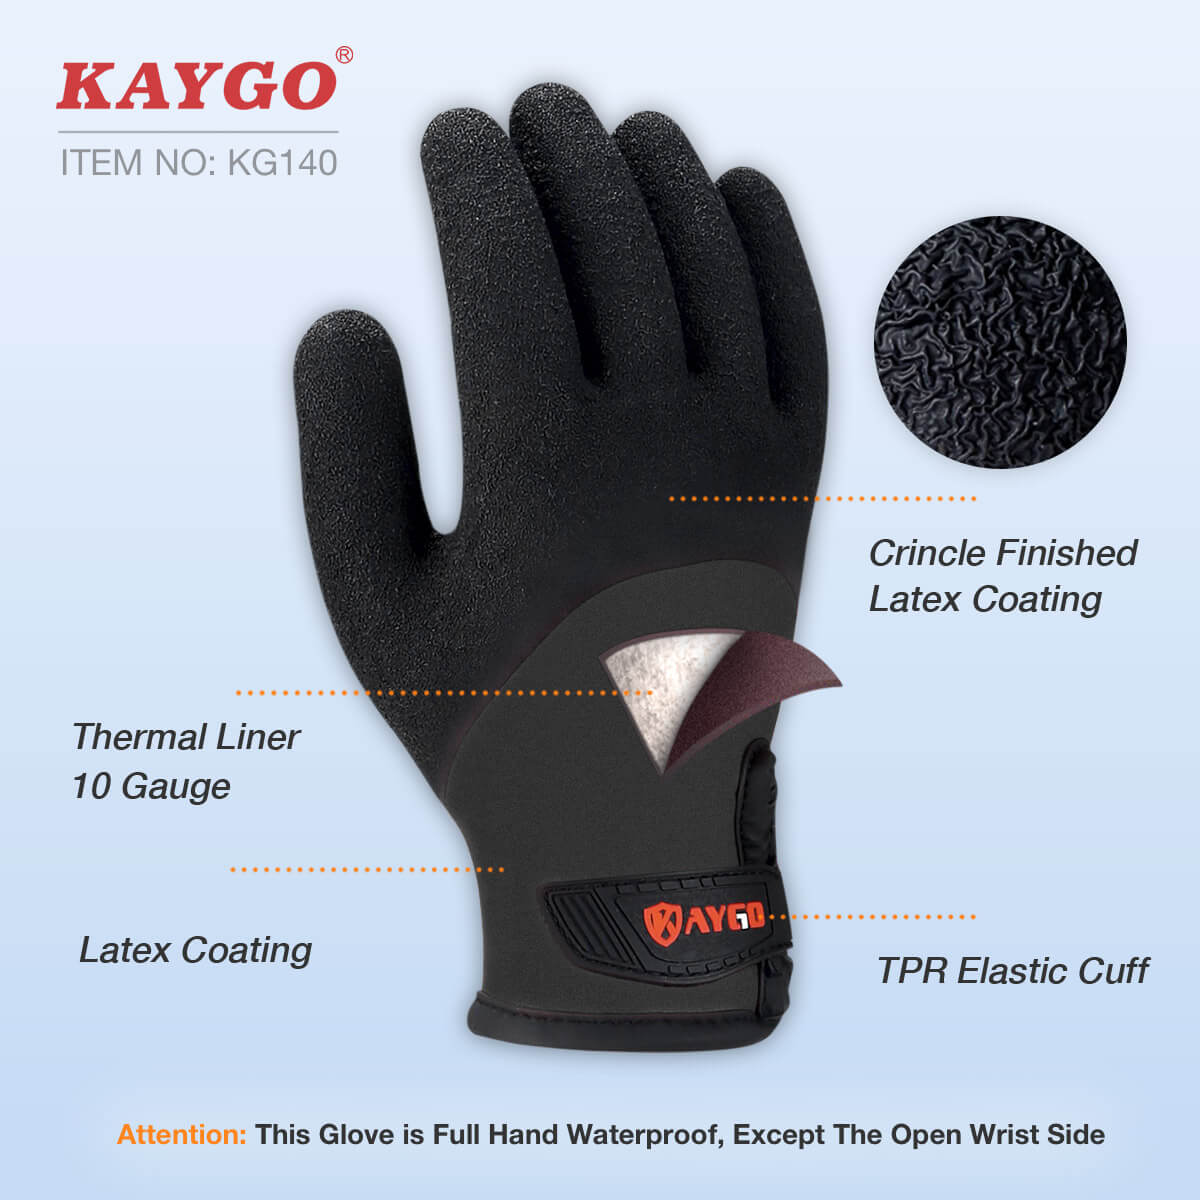 KAYGO Winter Insulated Mechanic Work Gloves KG126W,Double Lining,Improved  dexterity,Excellent Grip,Heavy duty, Utility Work Gloves for cars and